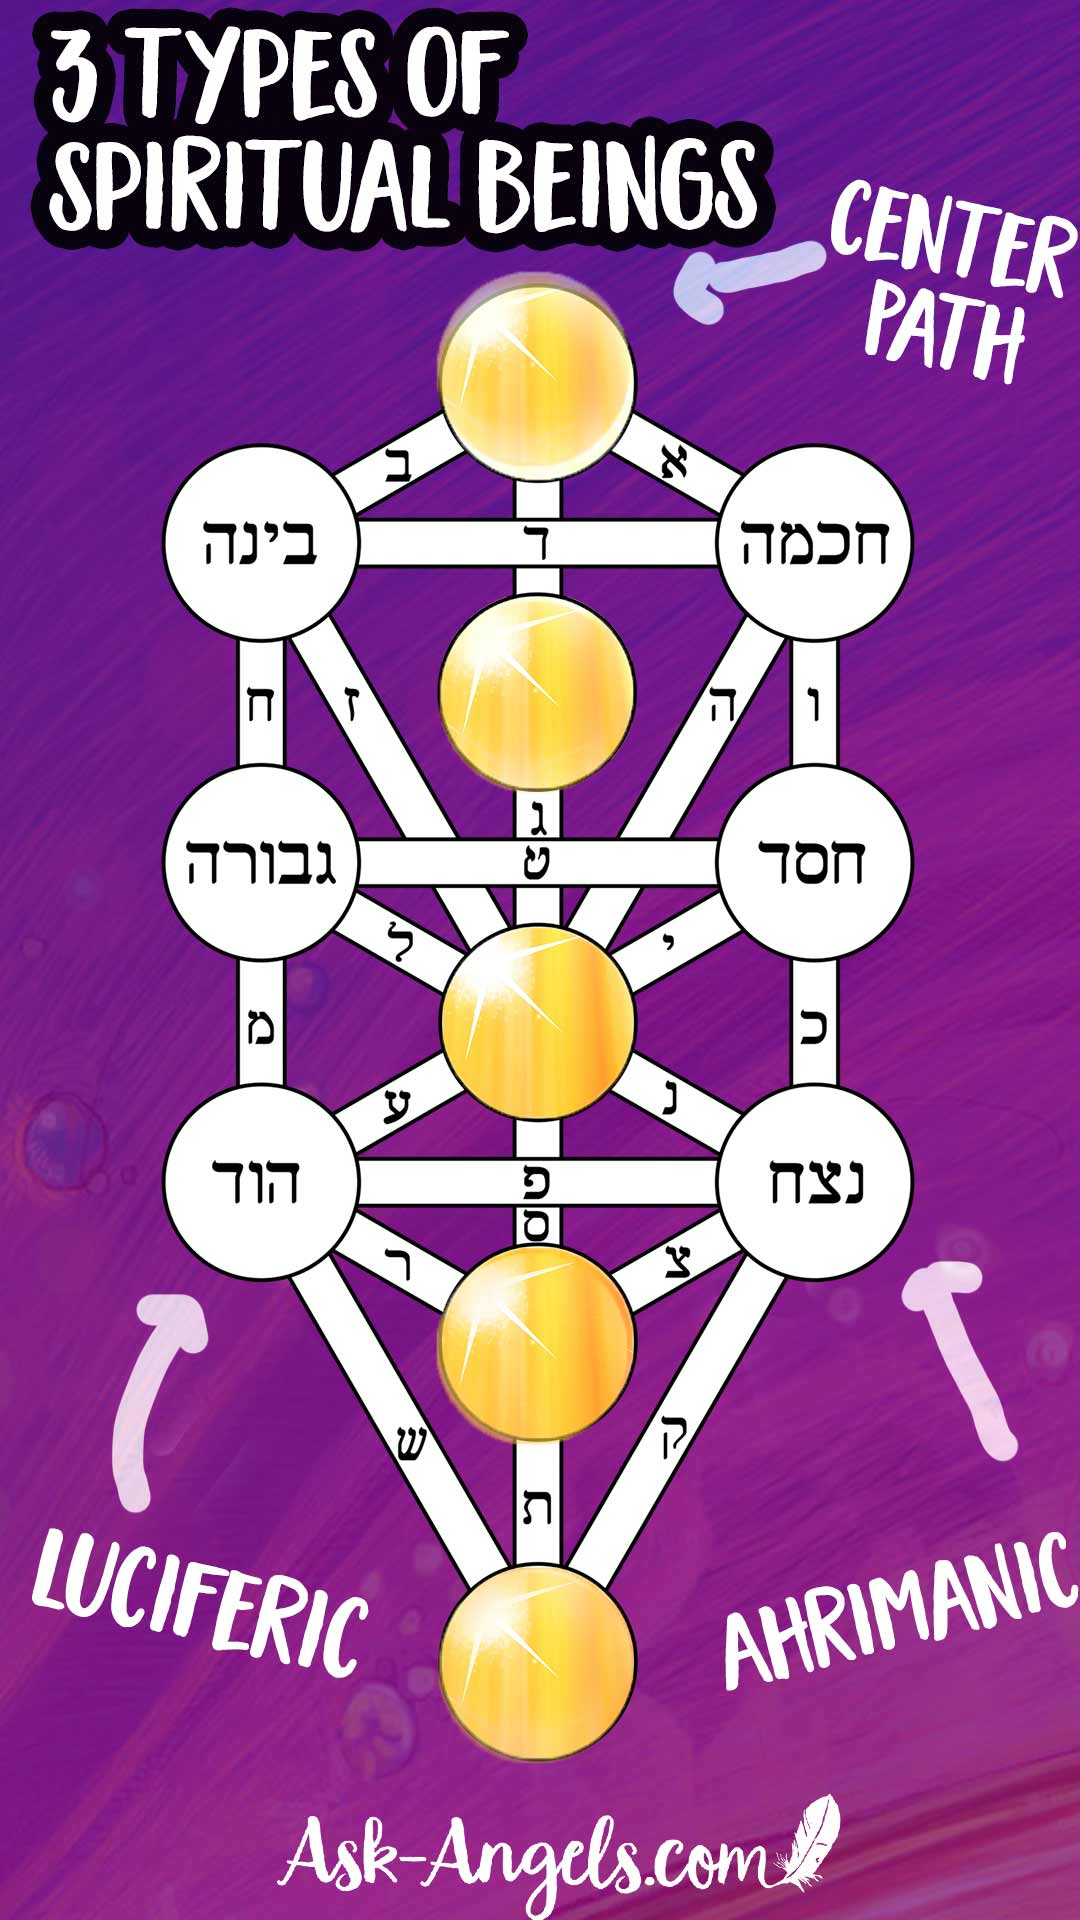 Hidden Insight Into the Types of Spiritual Beings found in the Kabbalistic Tree of Life